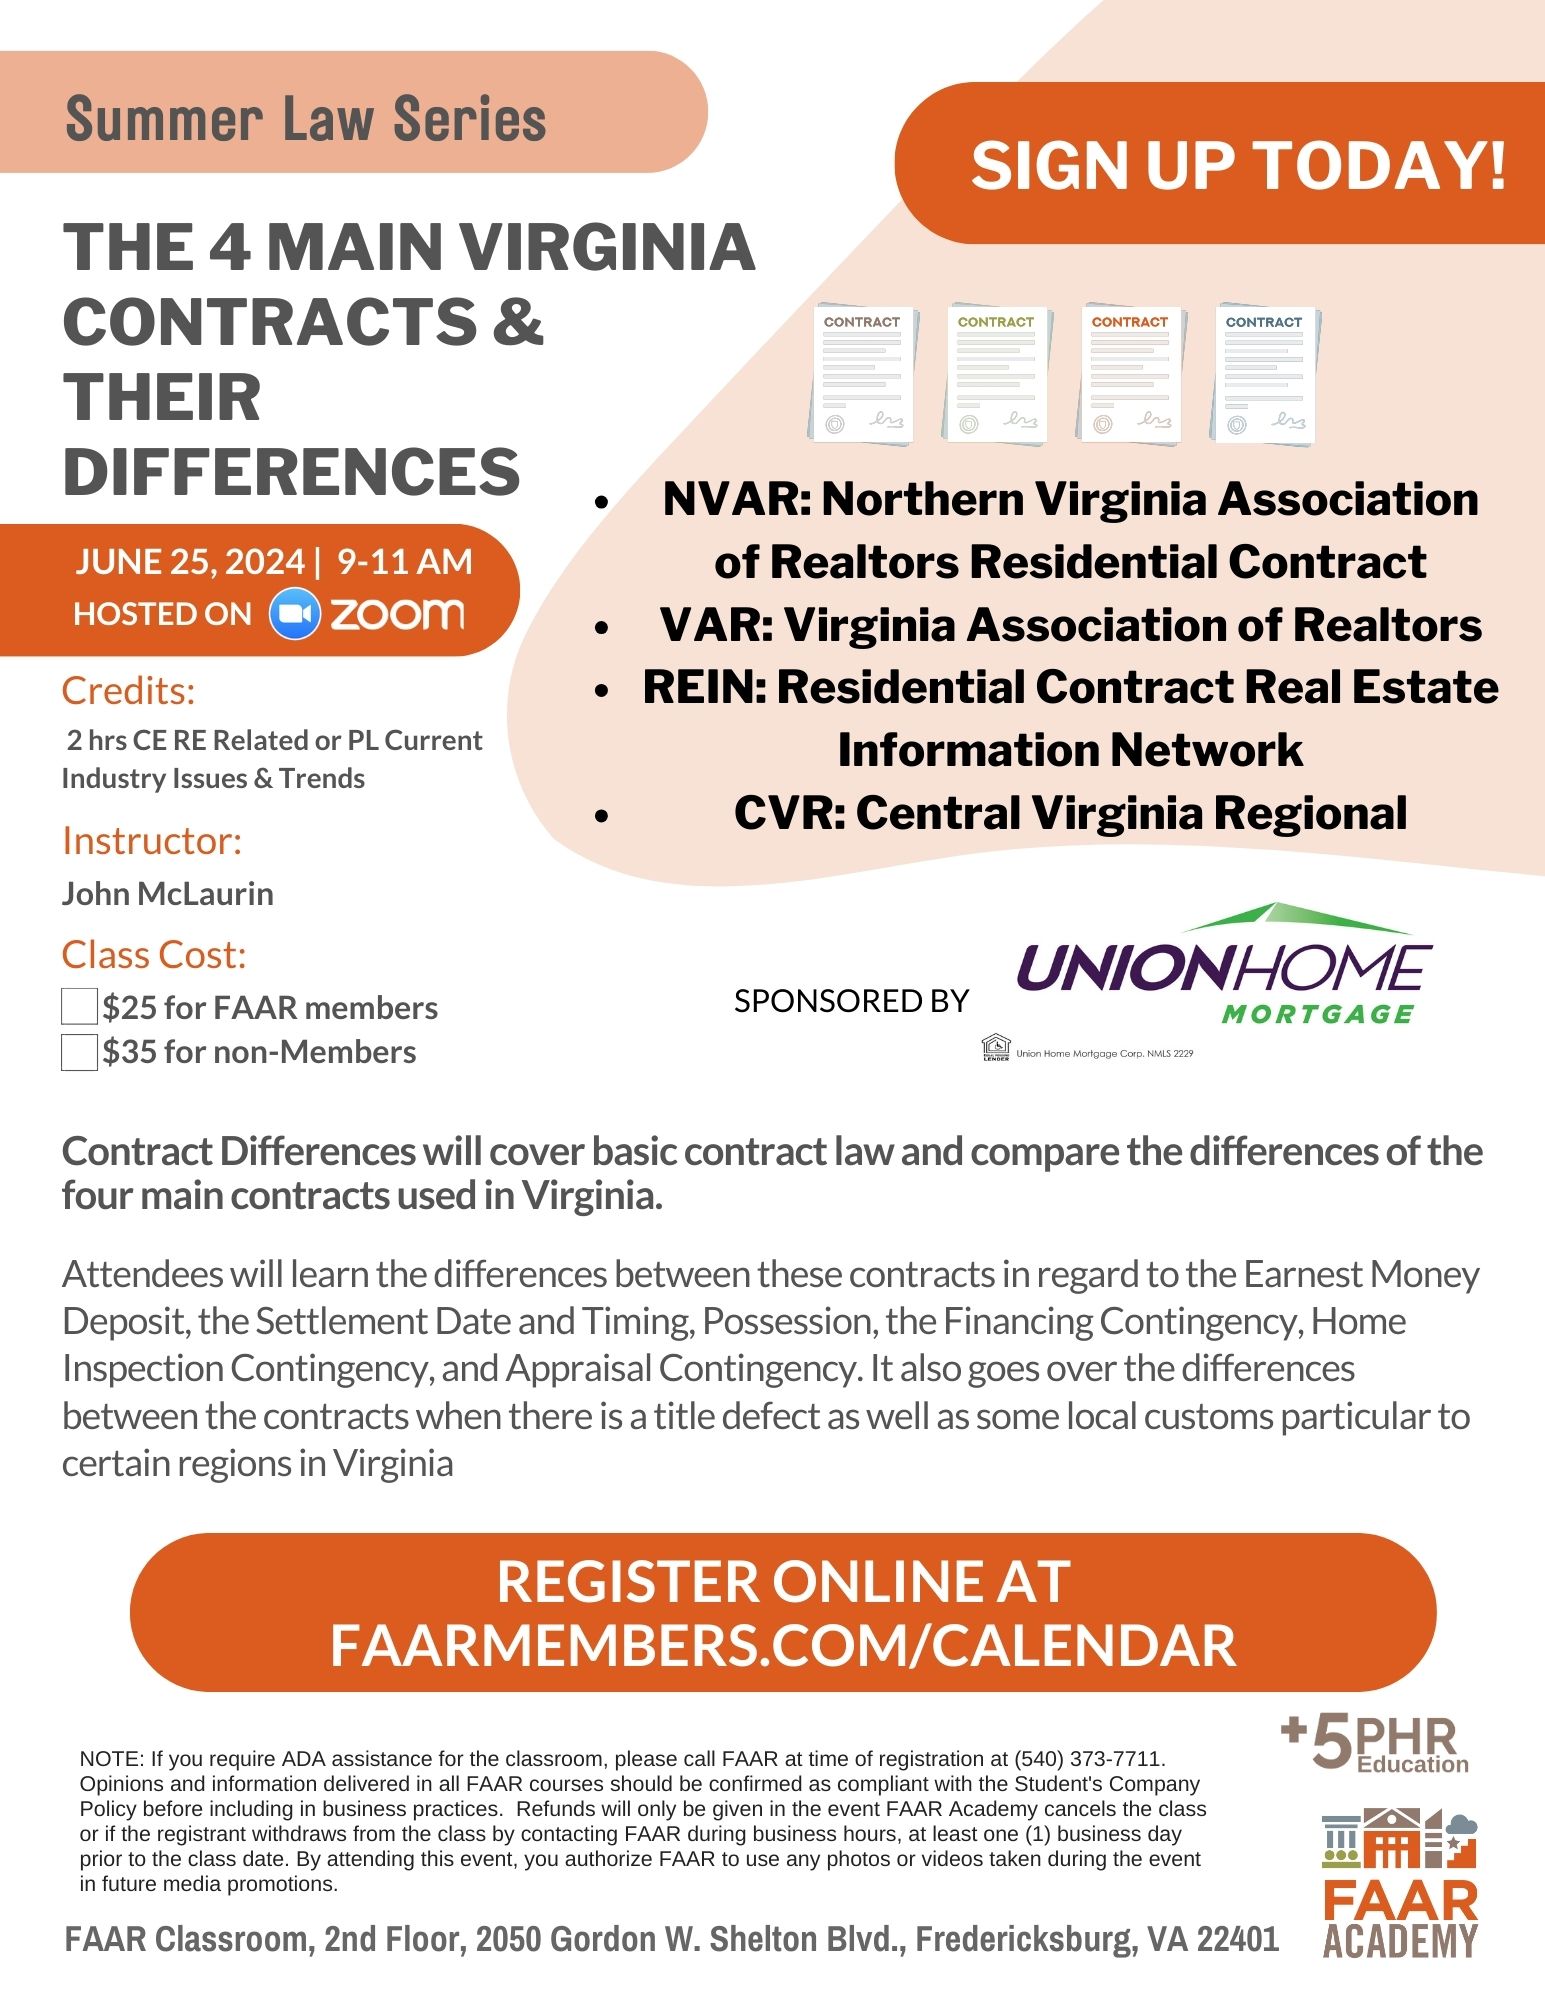 flyer for real estate class covering the four most common virginia real estate contracts seen in the Fredericksburg region. Call 540-373-7711 for help with regisstration.